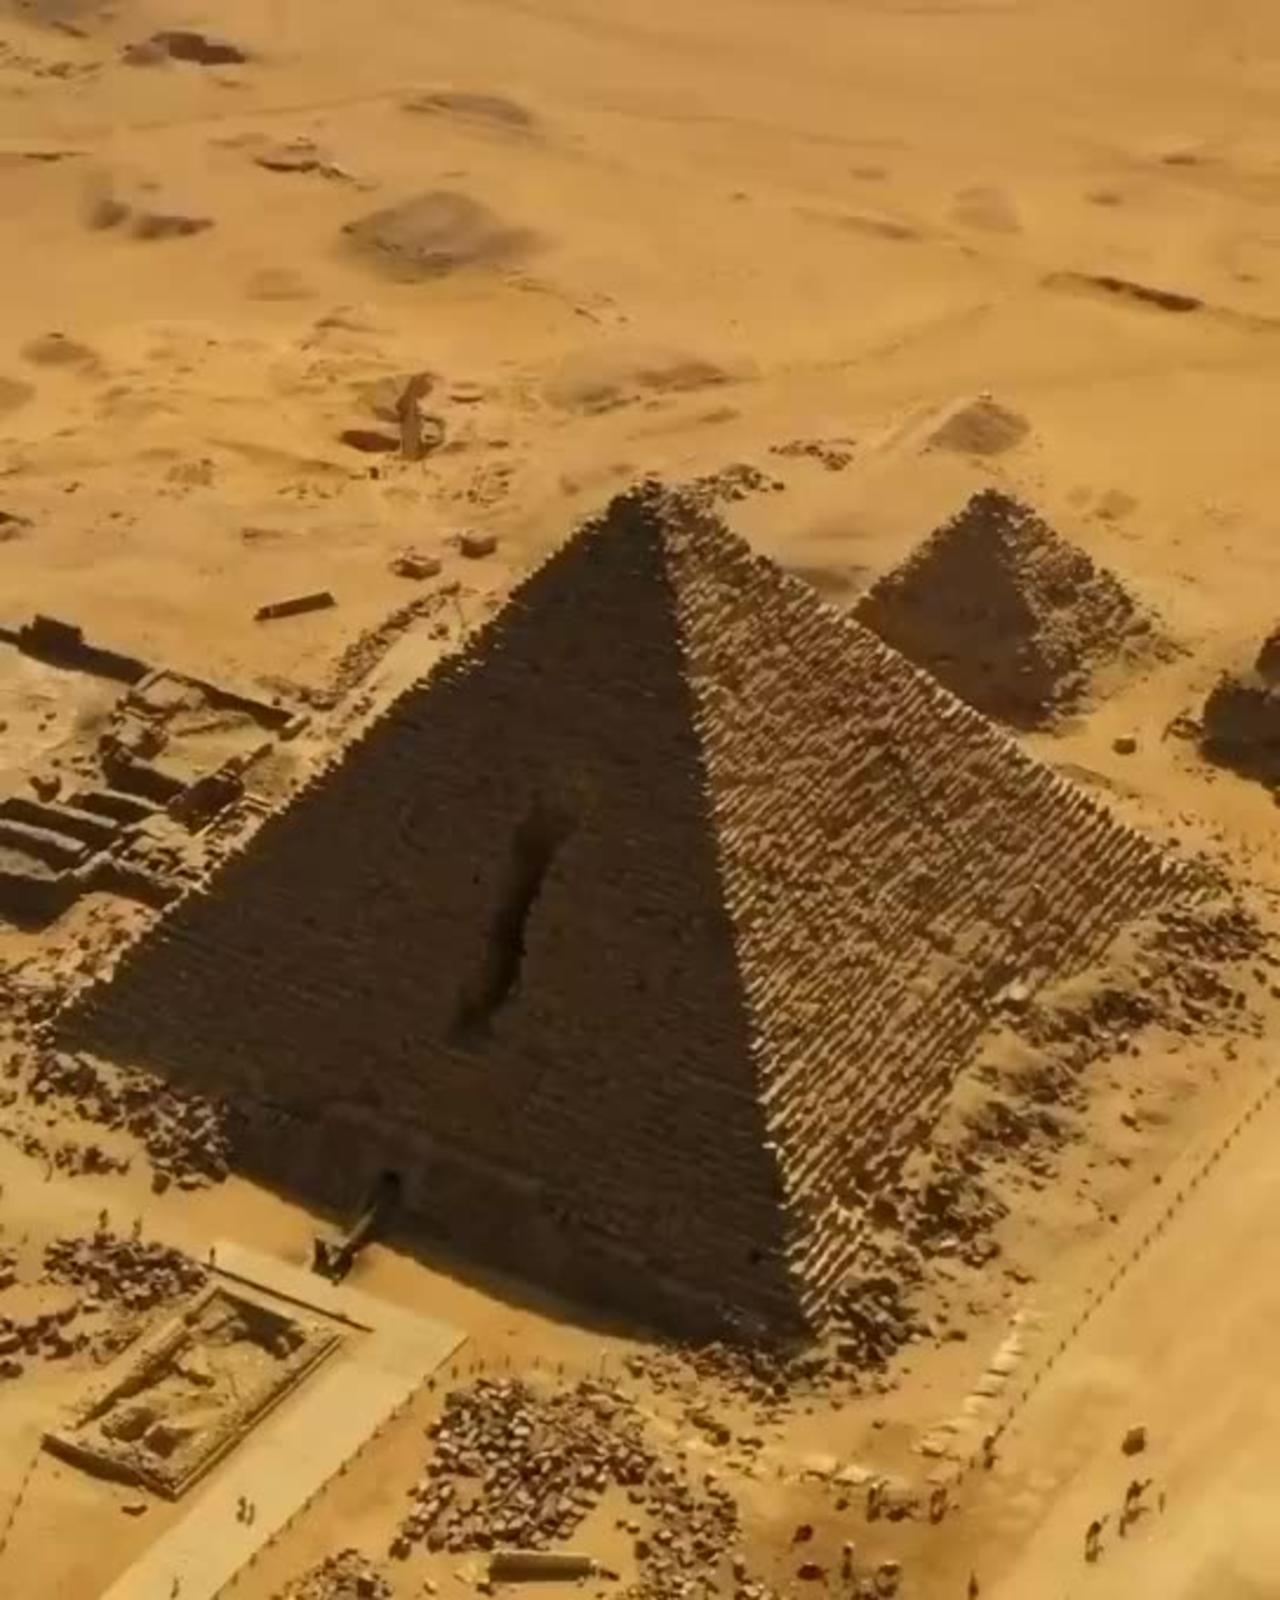 The Great Pyramids - Egypt